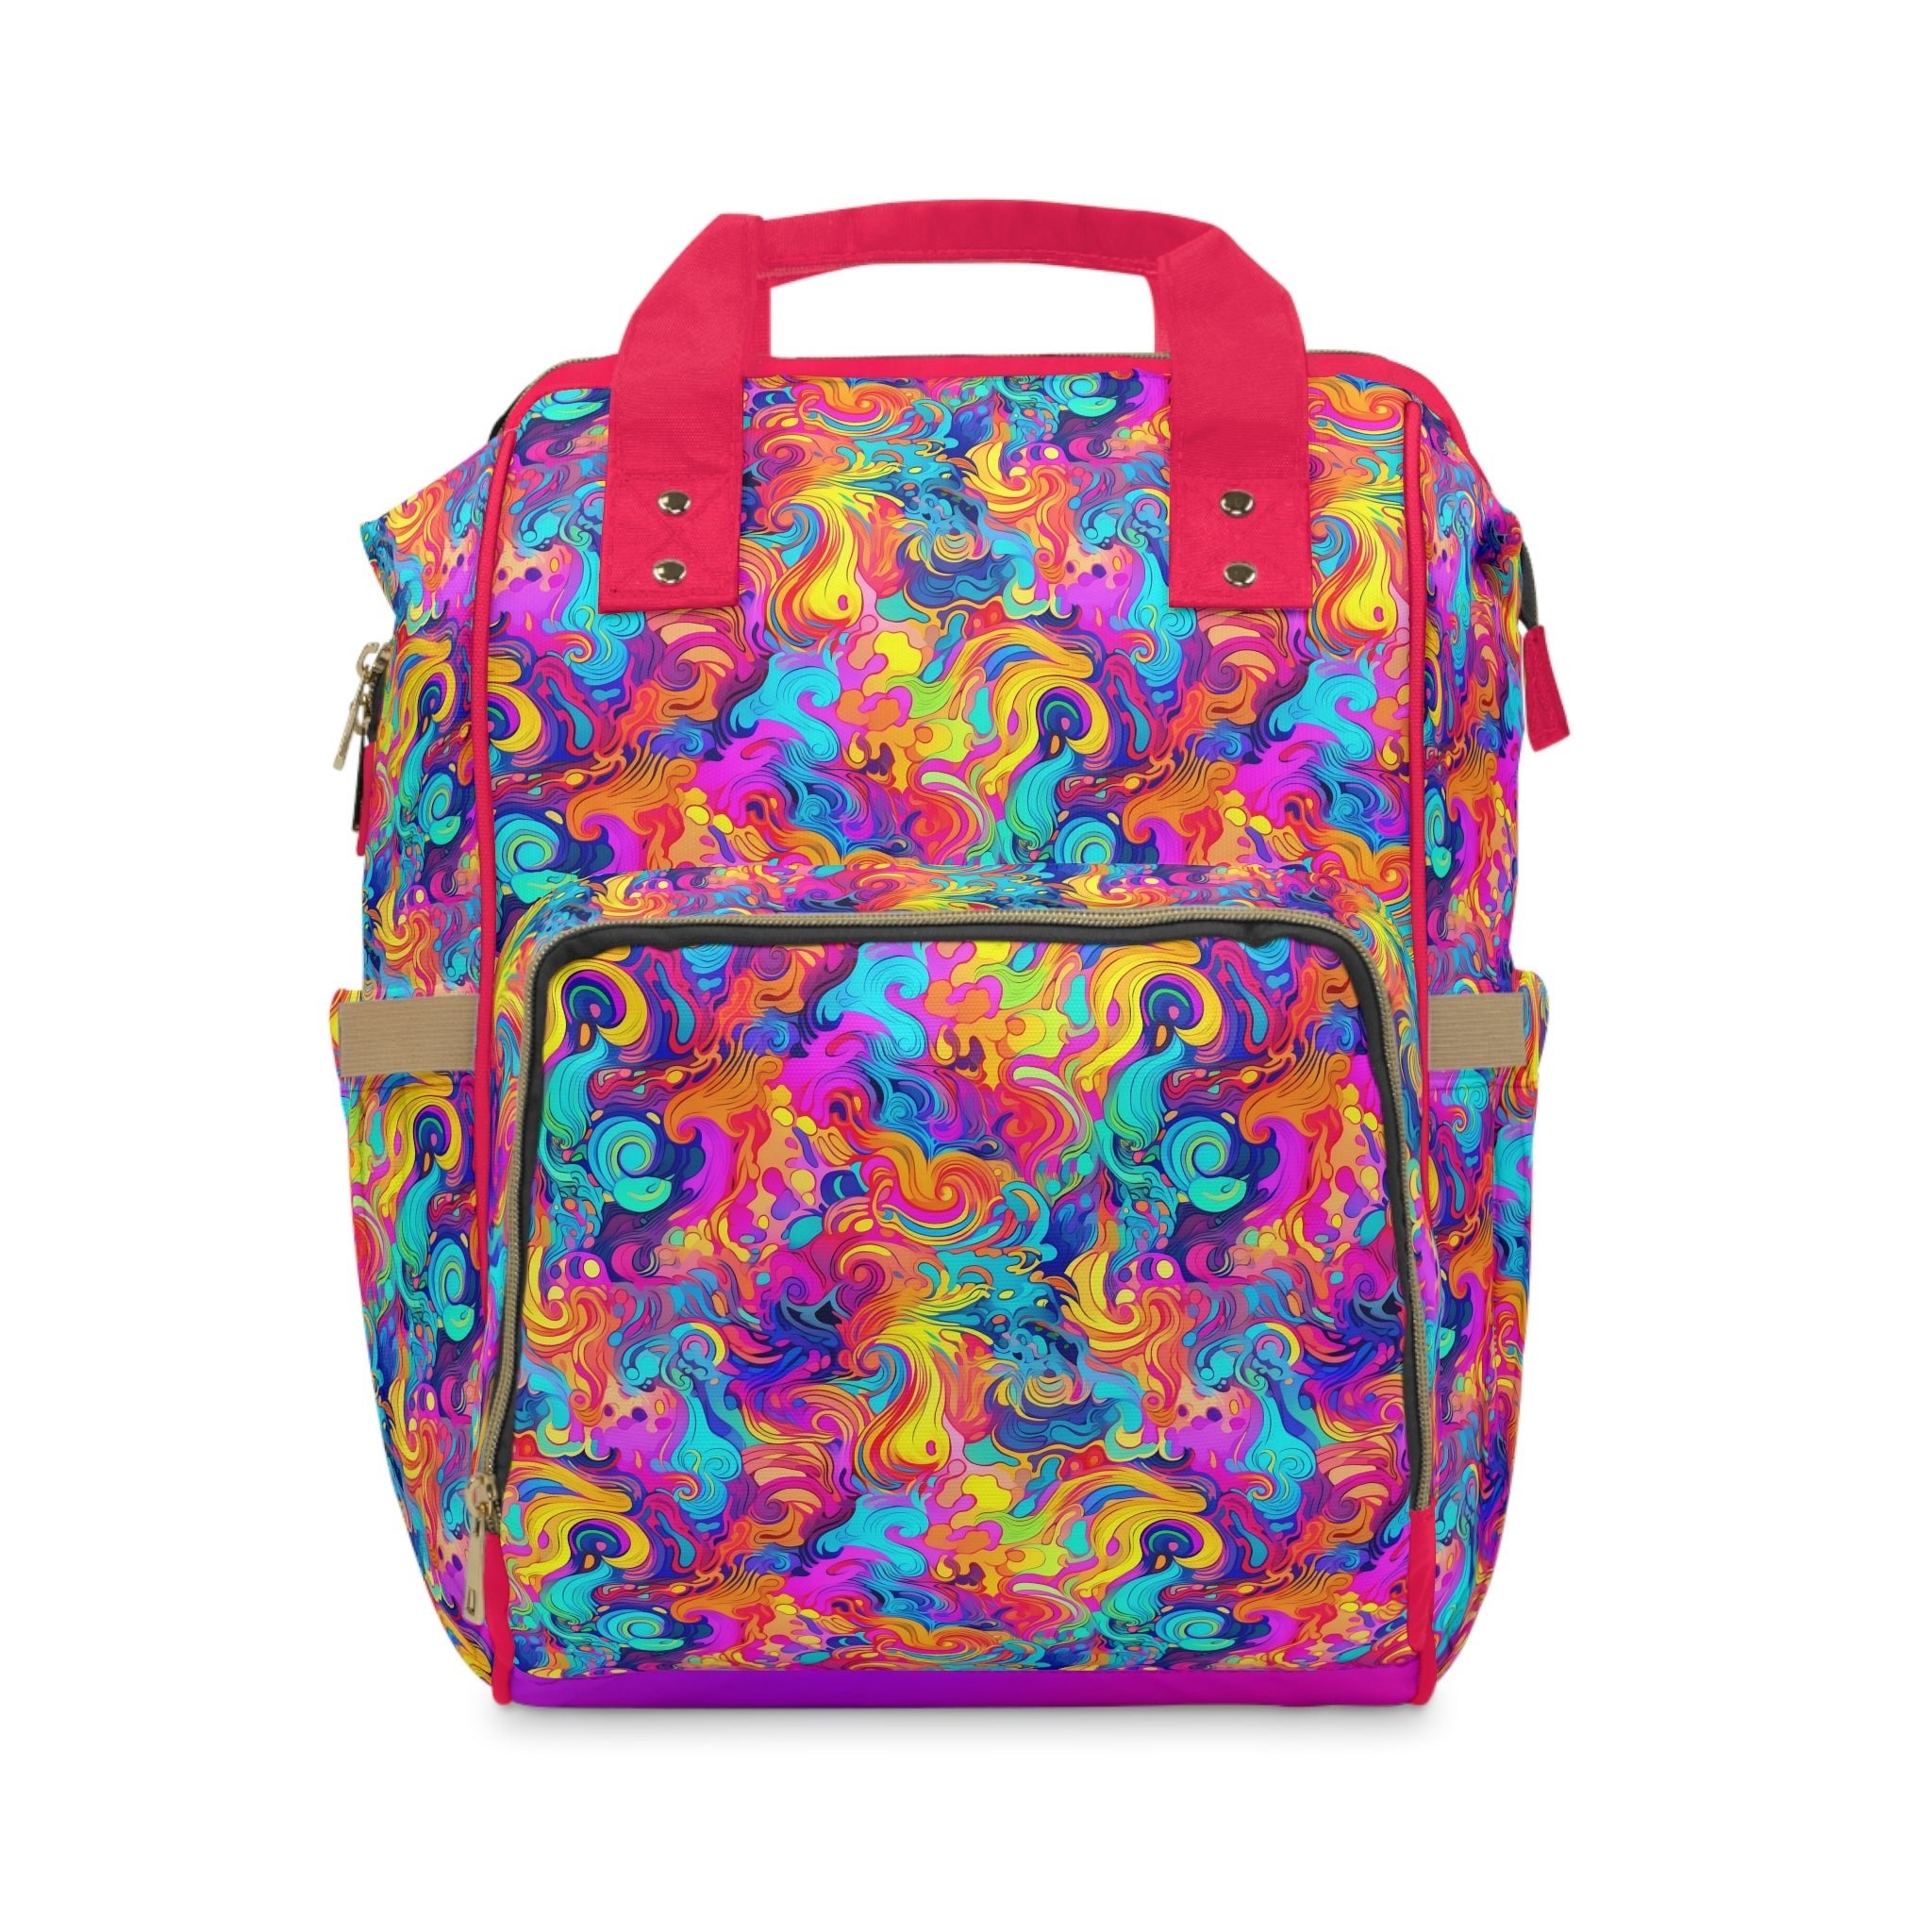 Loungefly MTV Clear Neon Pink Yellow Color Debossed Mini Backpack Bag  READ⭐️SEE | eBay